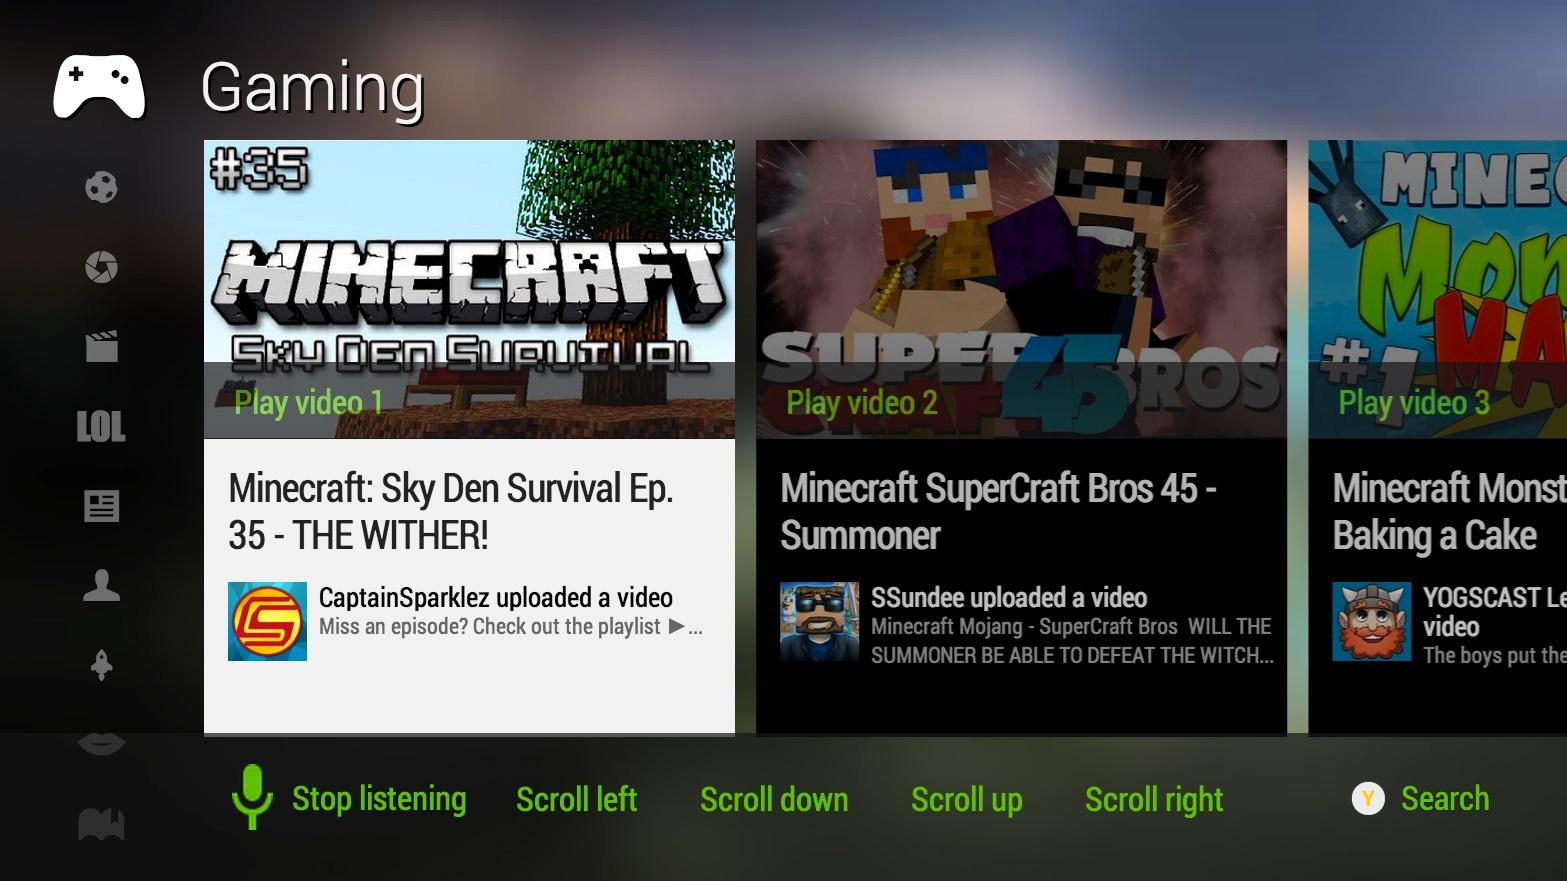 microsofts xbox one promo campaign youtube raises important disclosure questions app